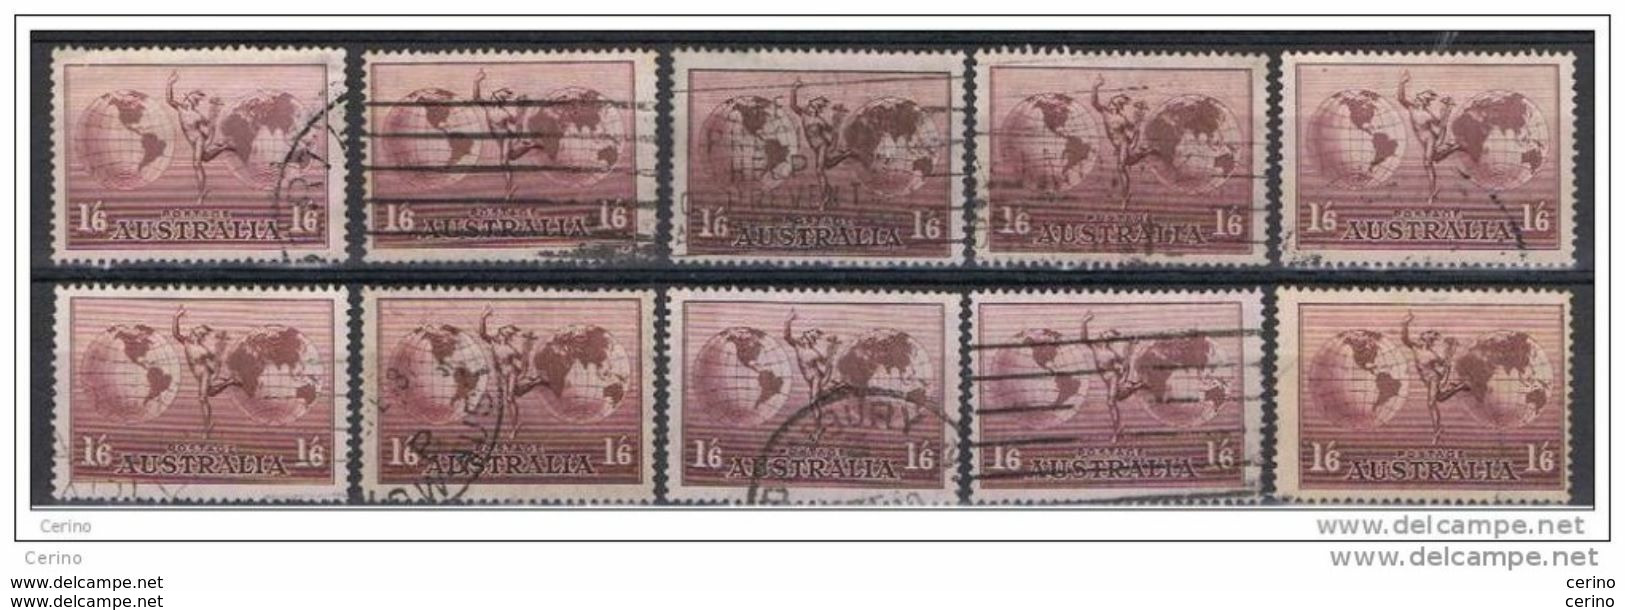 AUSTRALIA:  1937  AIR  MAIL  -  1/6  USED  STAMPS  -  REP.  10  EXEMPLARY  -  YV/TELL. 6 - Oblitérés